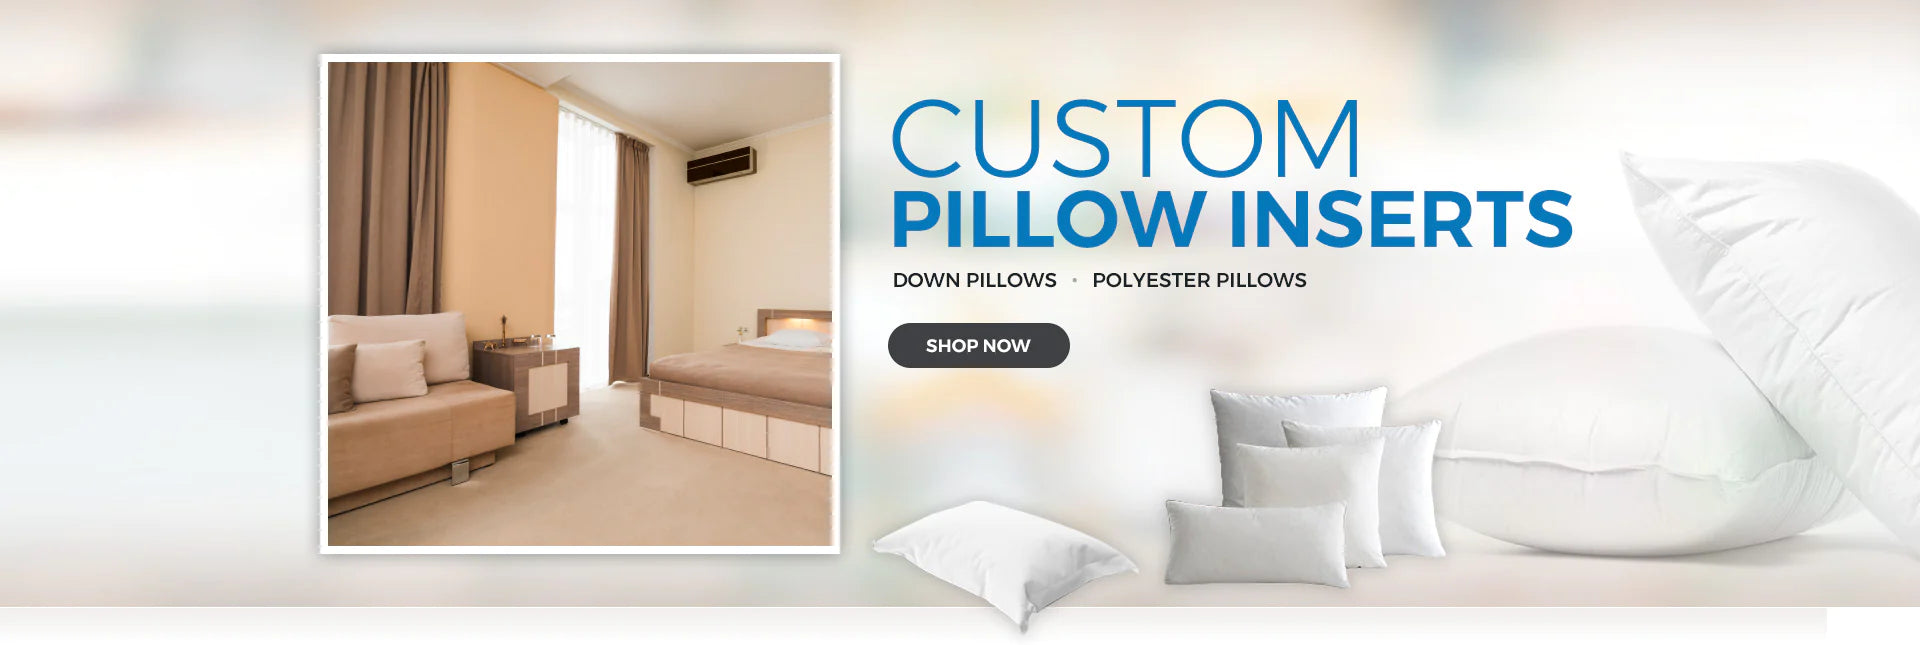 Down Pillows and Polyester Pillow Inserts